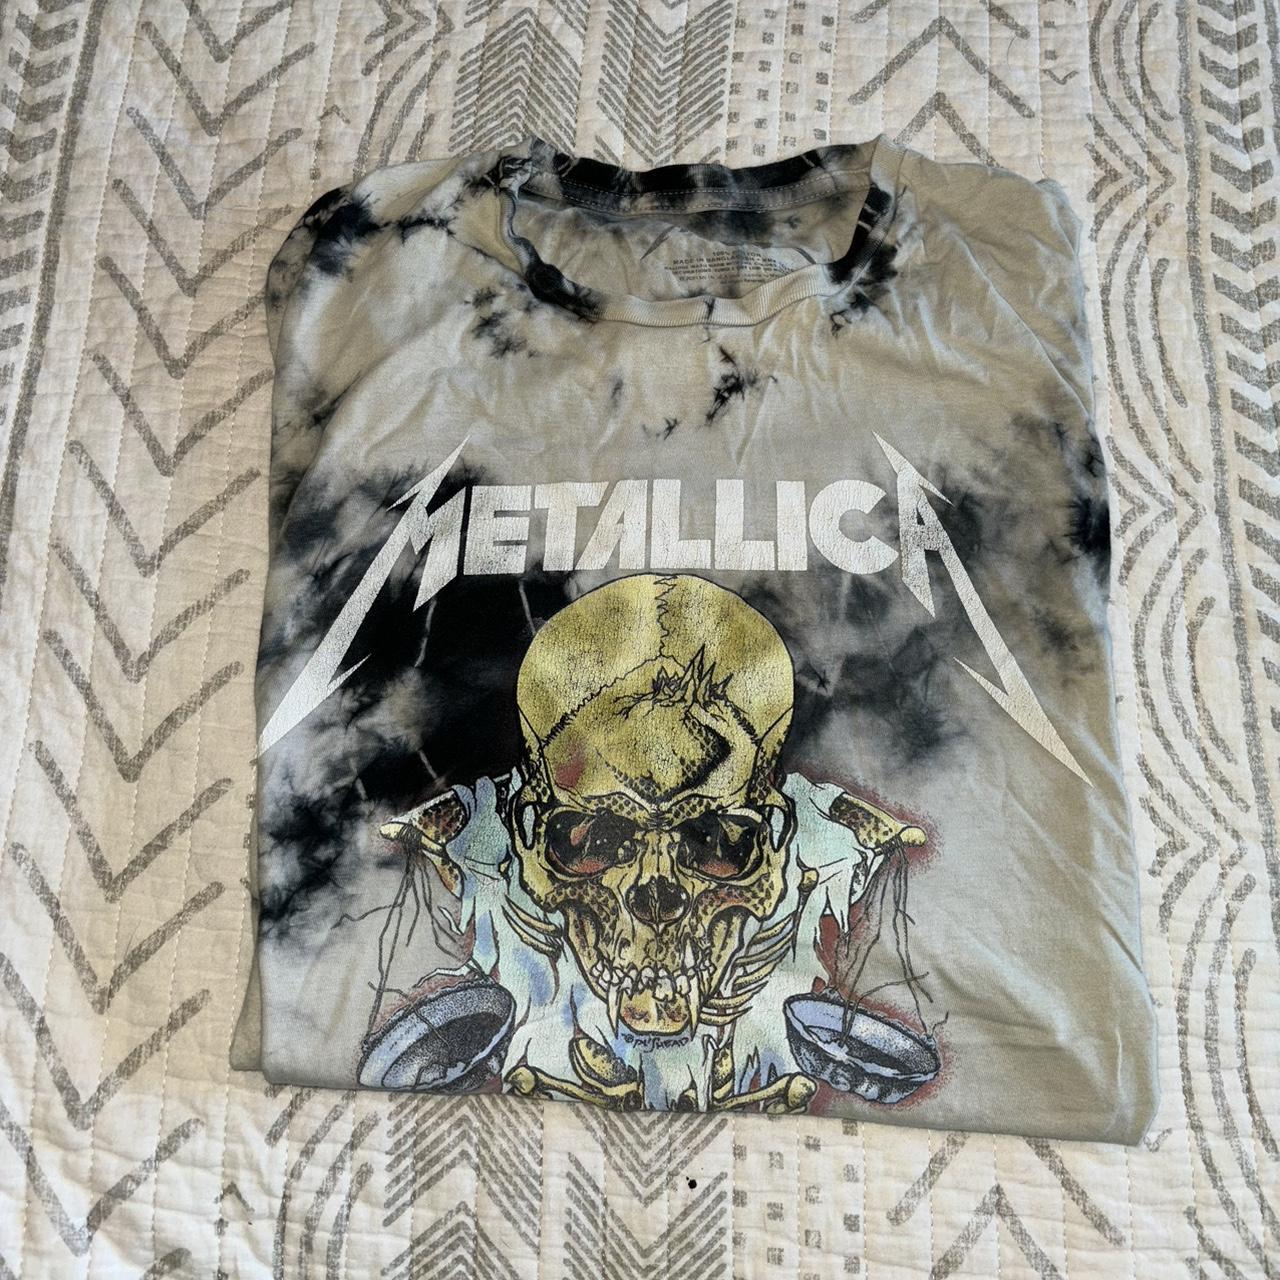 METALLICA RECORD This is a brand new, still sealed, - Depop